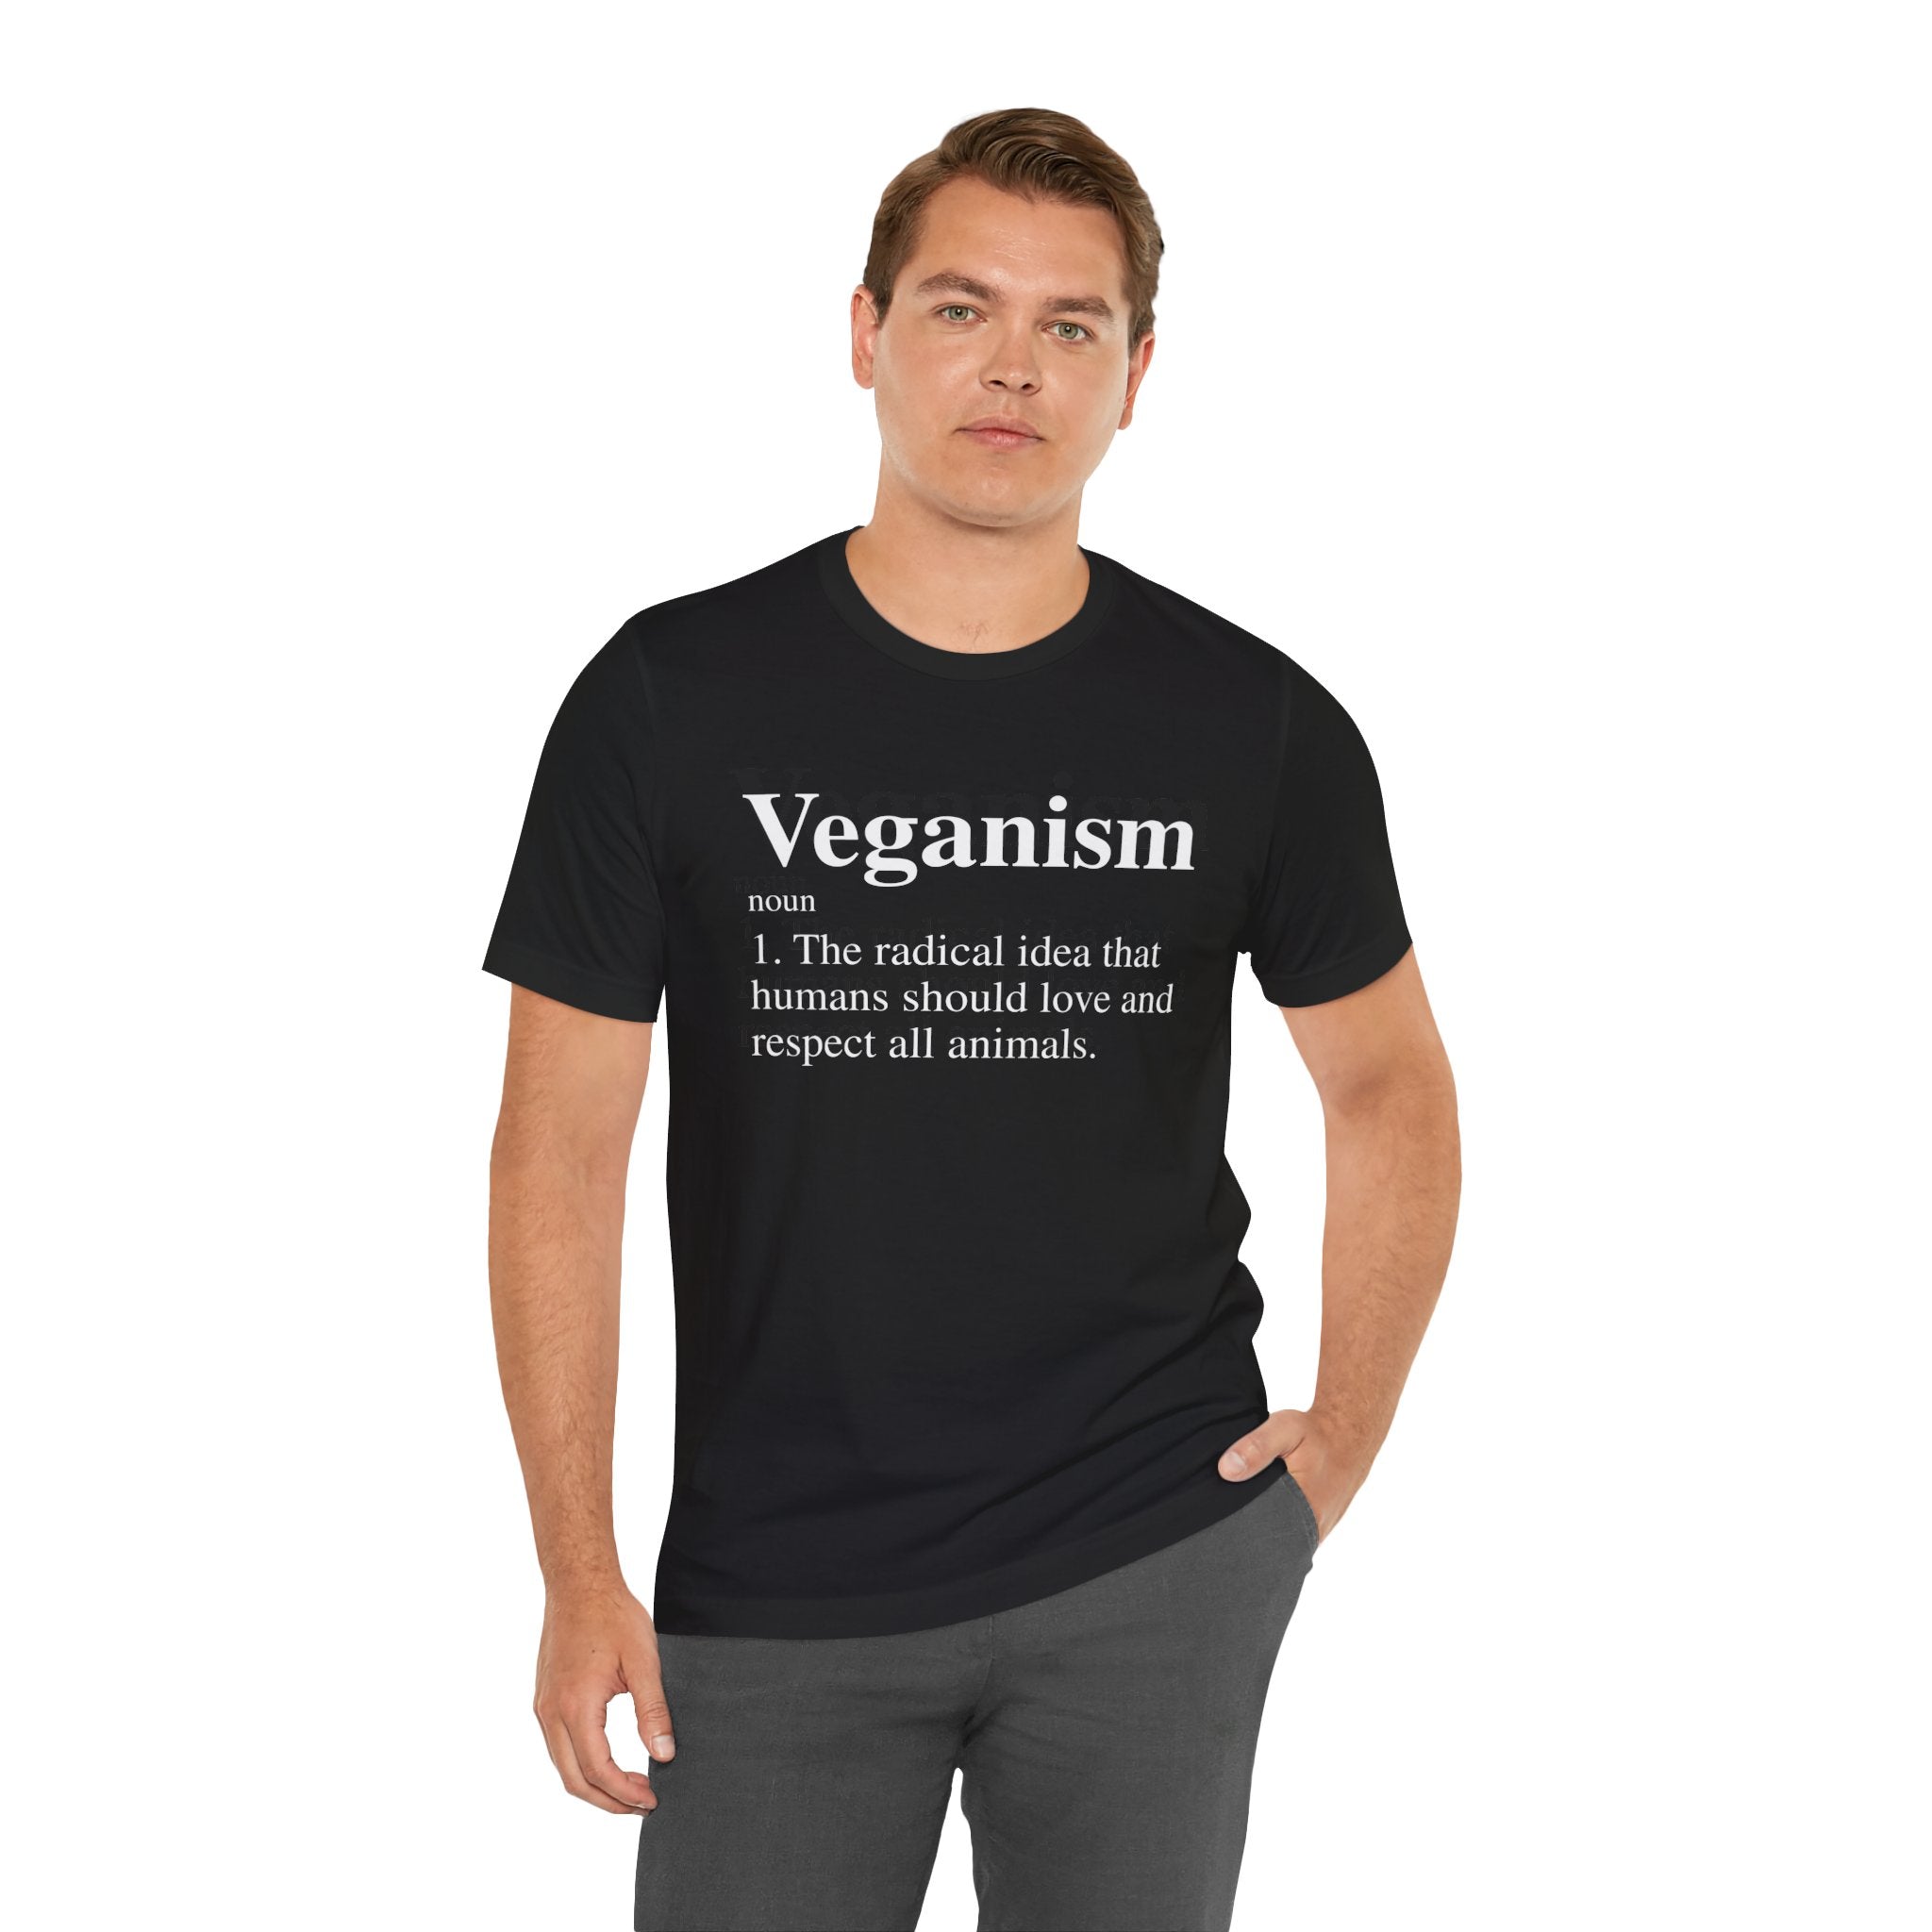 Man in a black Veganism T-Shirt, standing with a neutral expression.